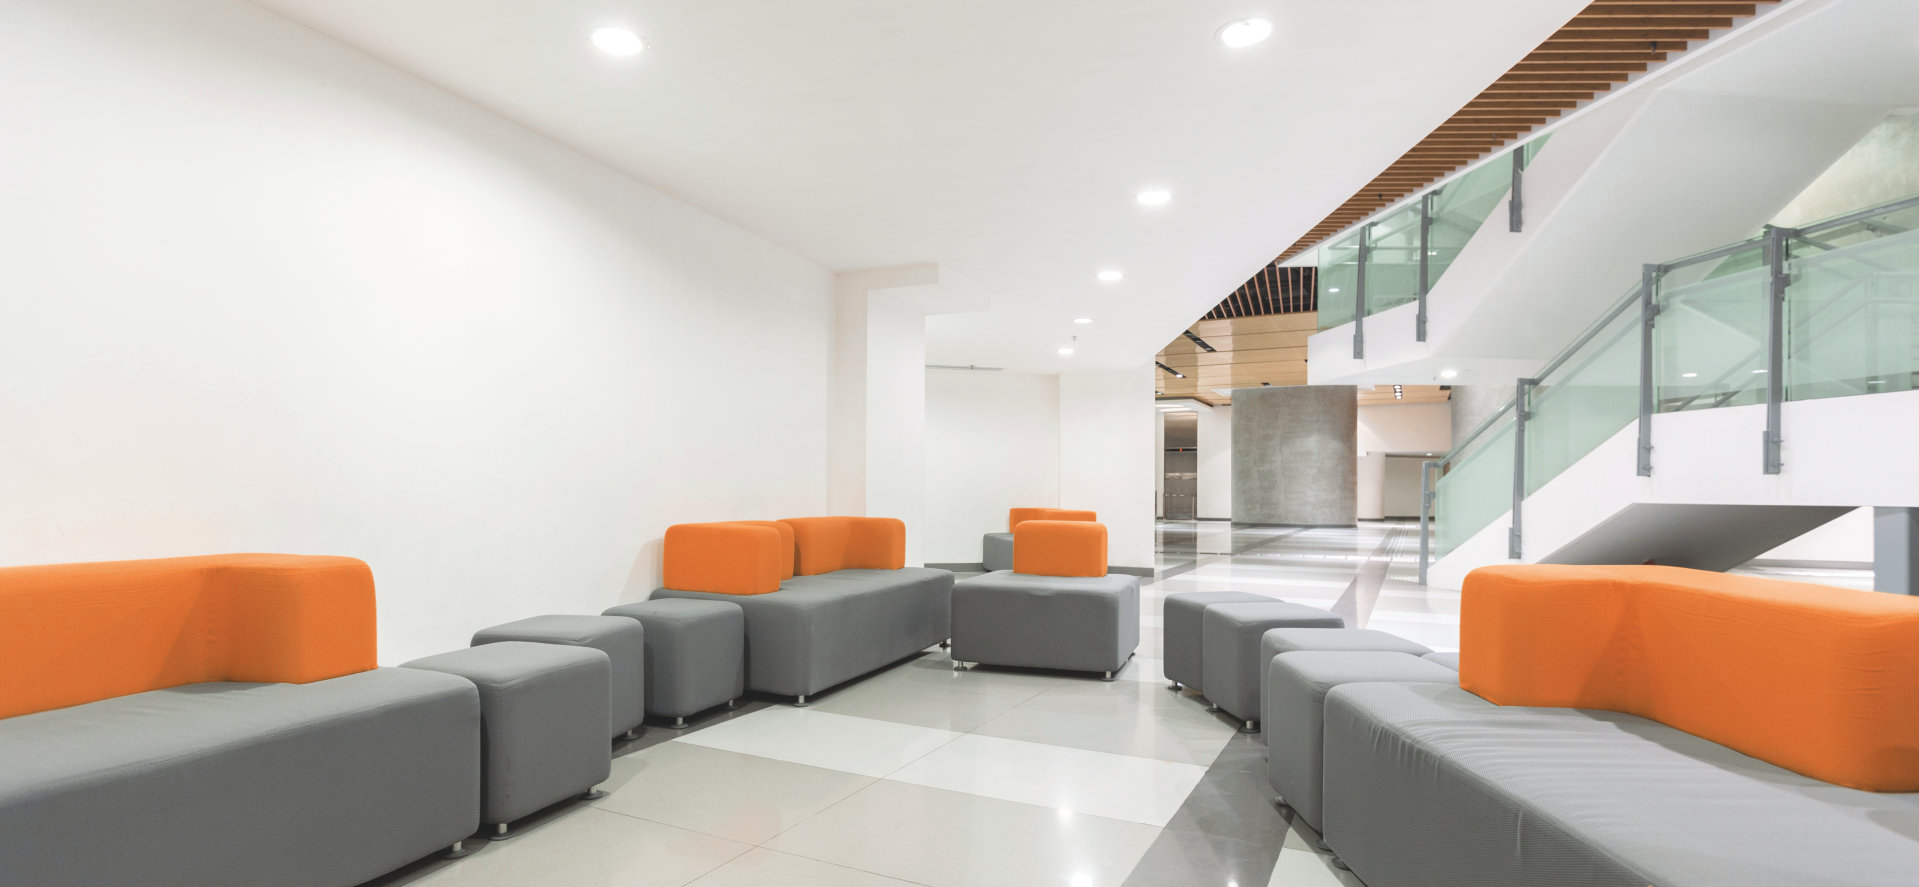 Lighting solutions for office environments